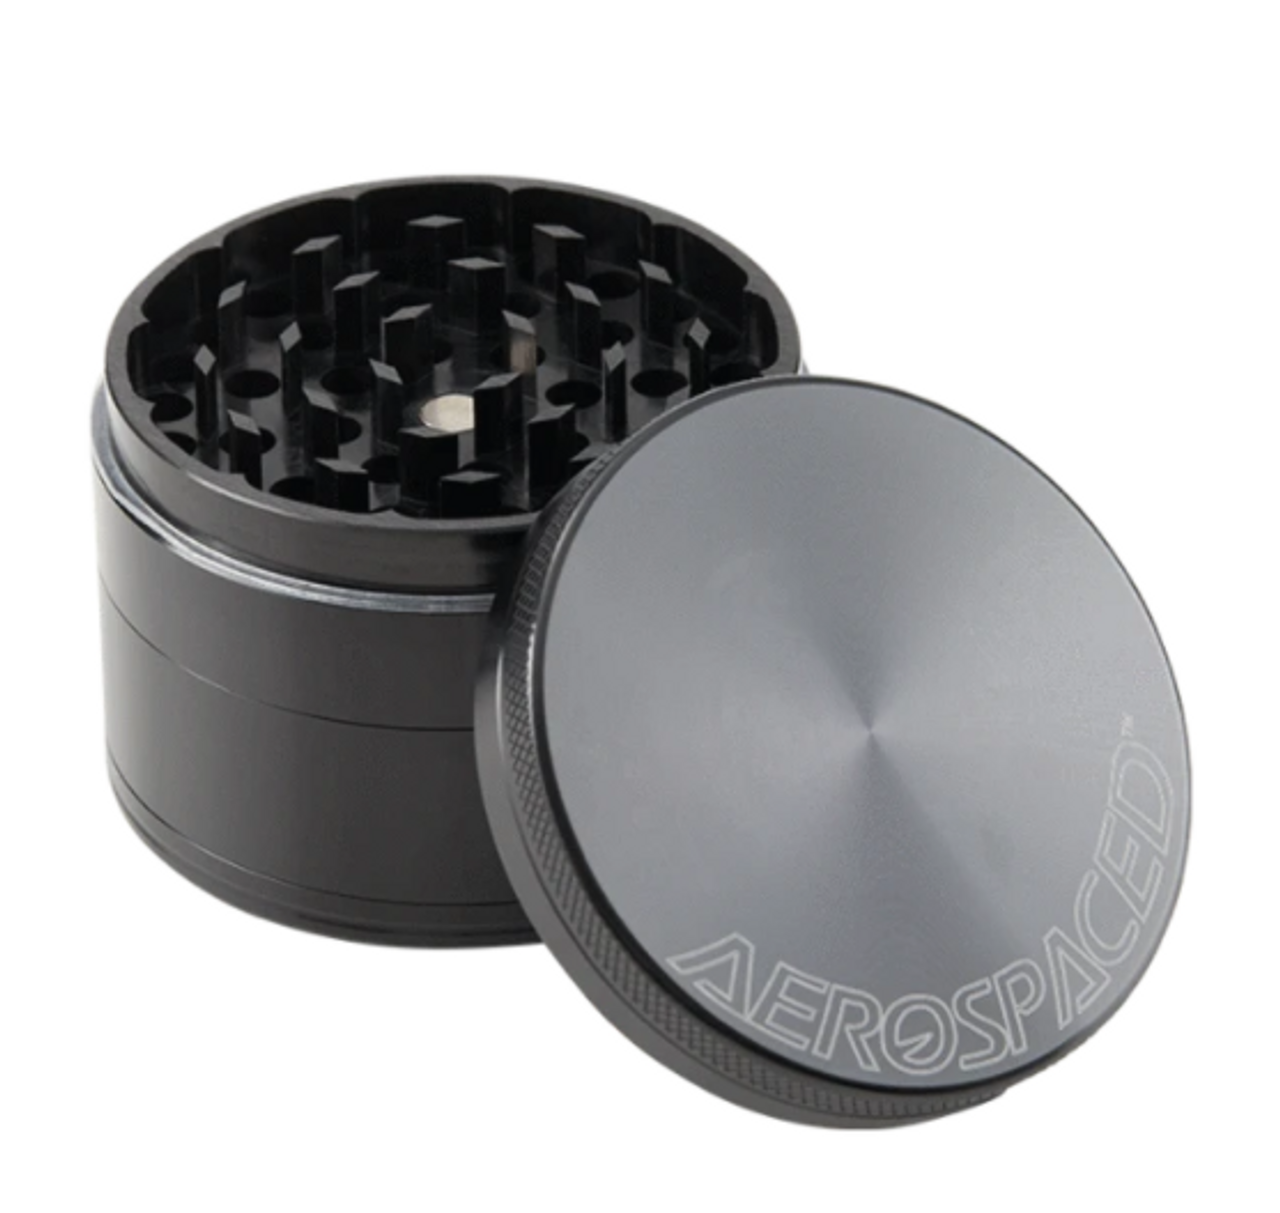 Aerospaced by Higher Standards - 4 Piece Grinder - 2.5" (63 mm) | Assorted Colors